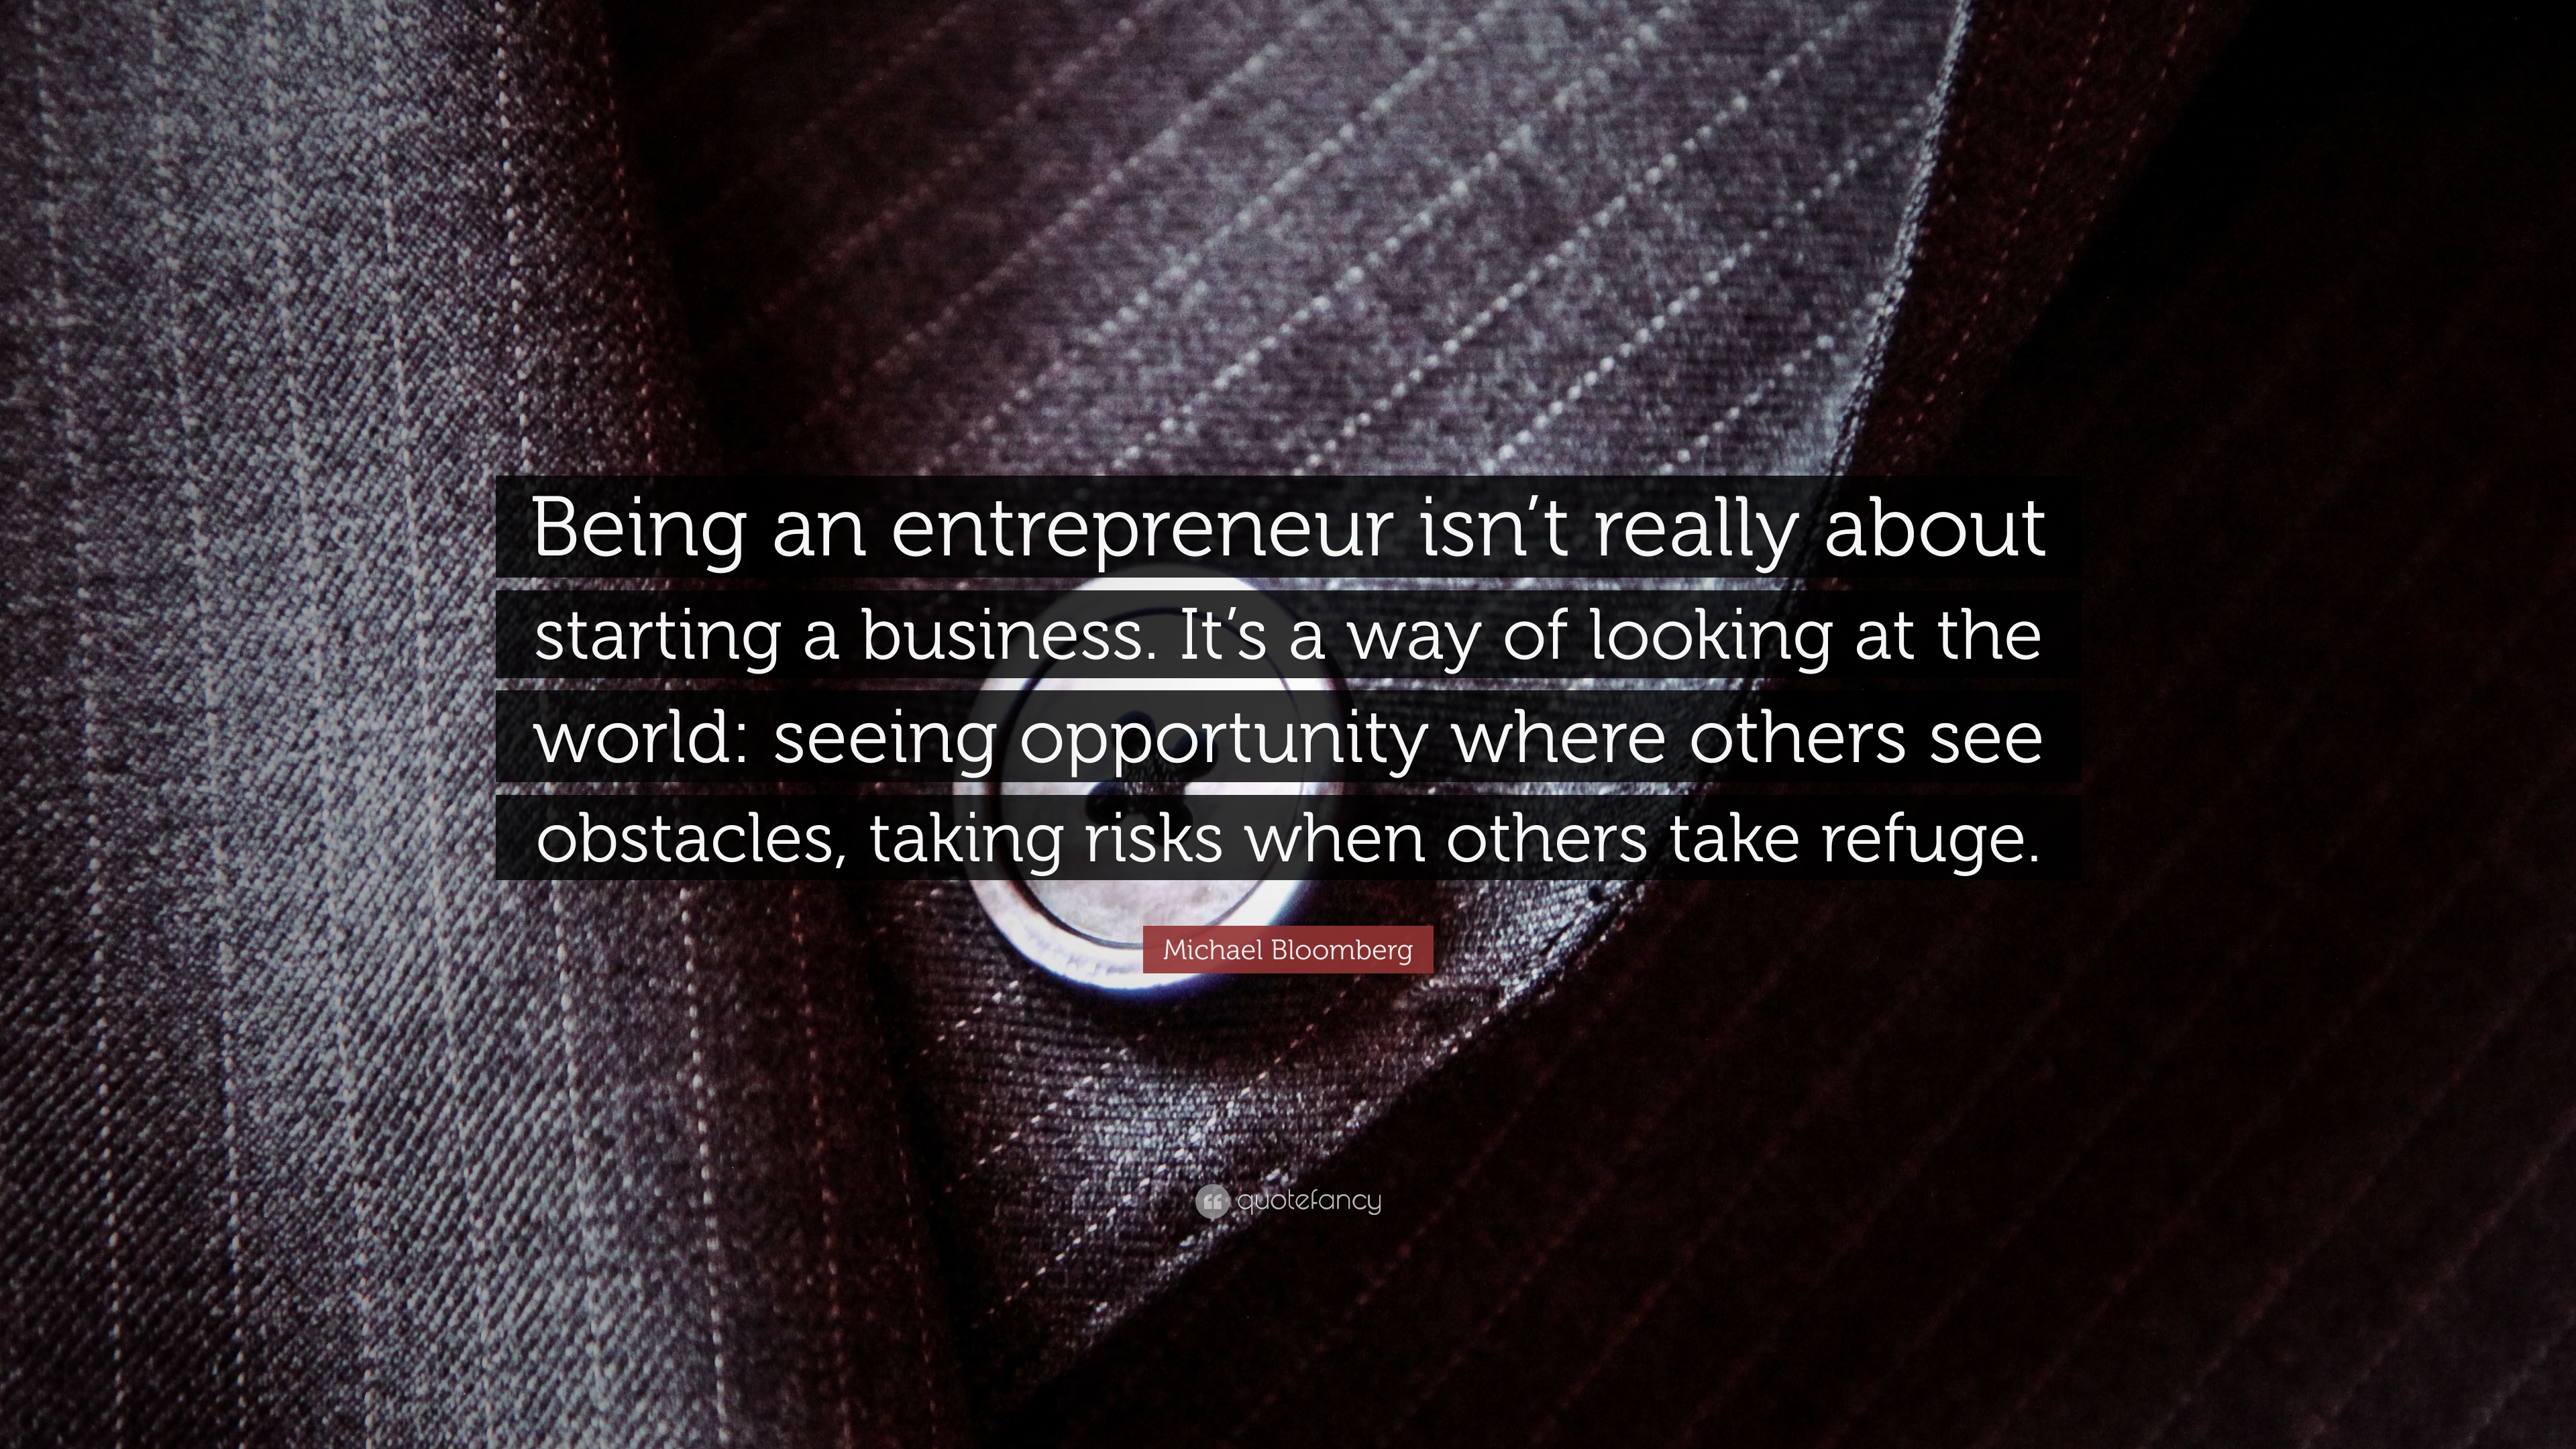 Michael Bloomberg Quote: “Being an entrepreneur isn't really about